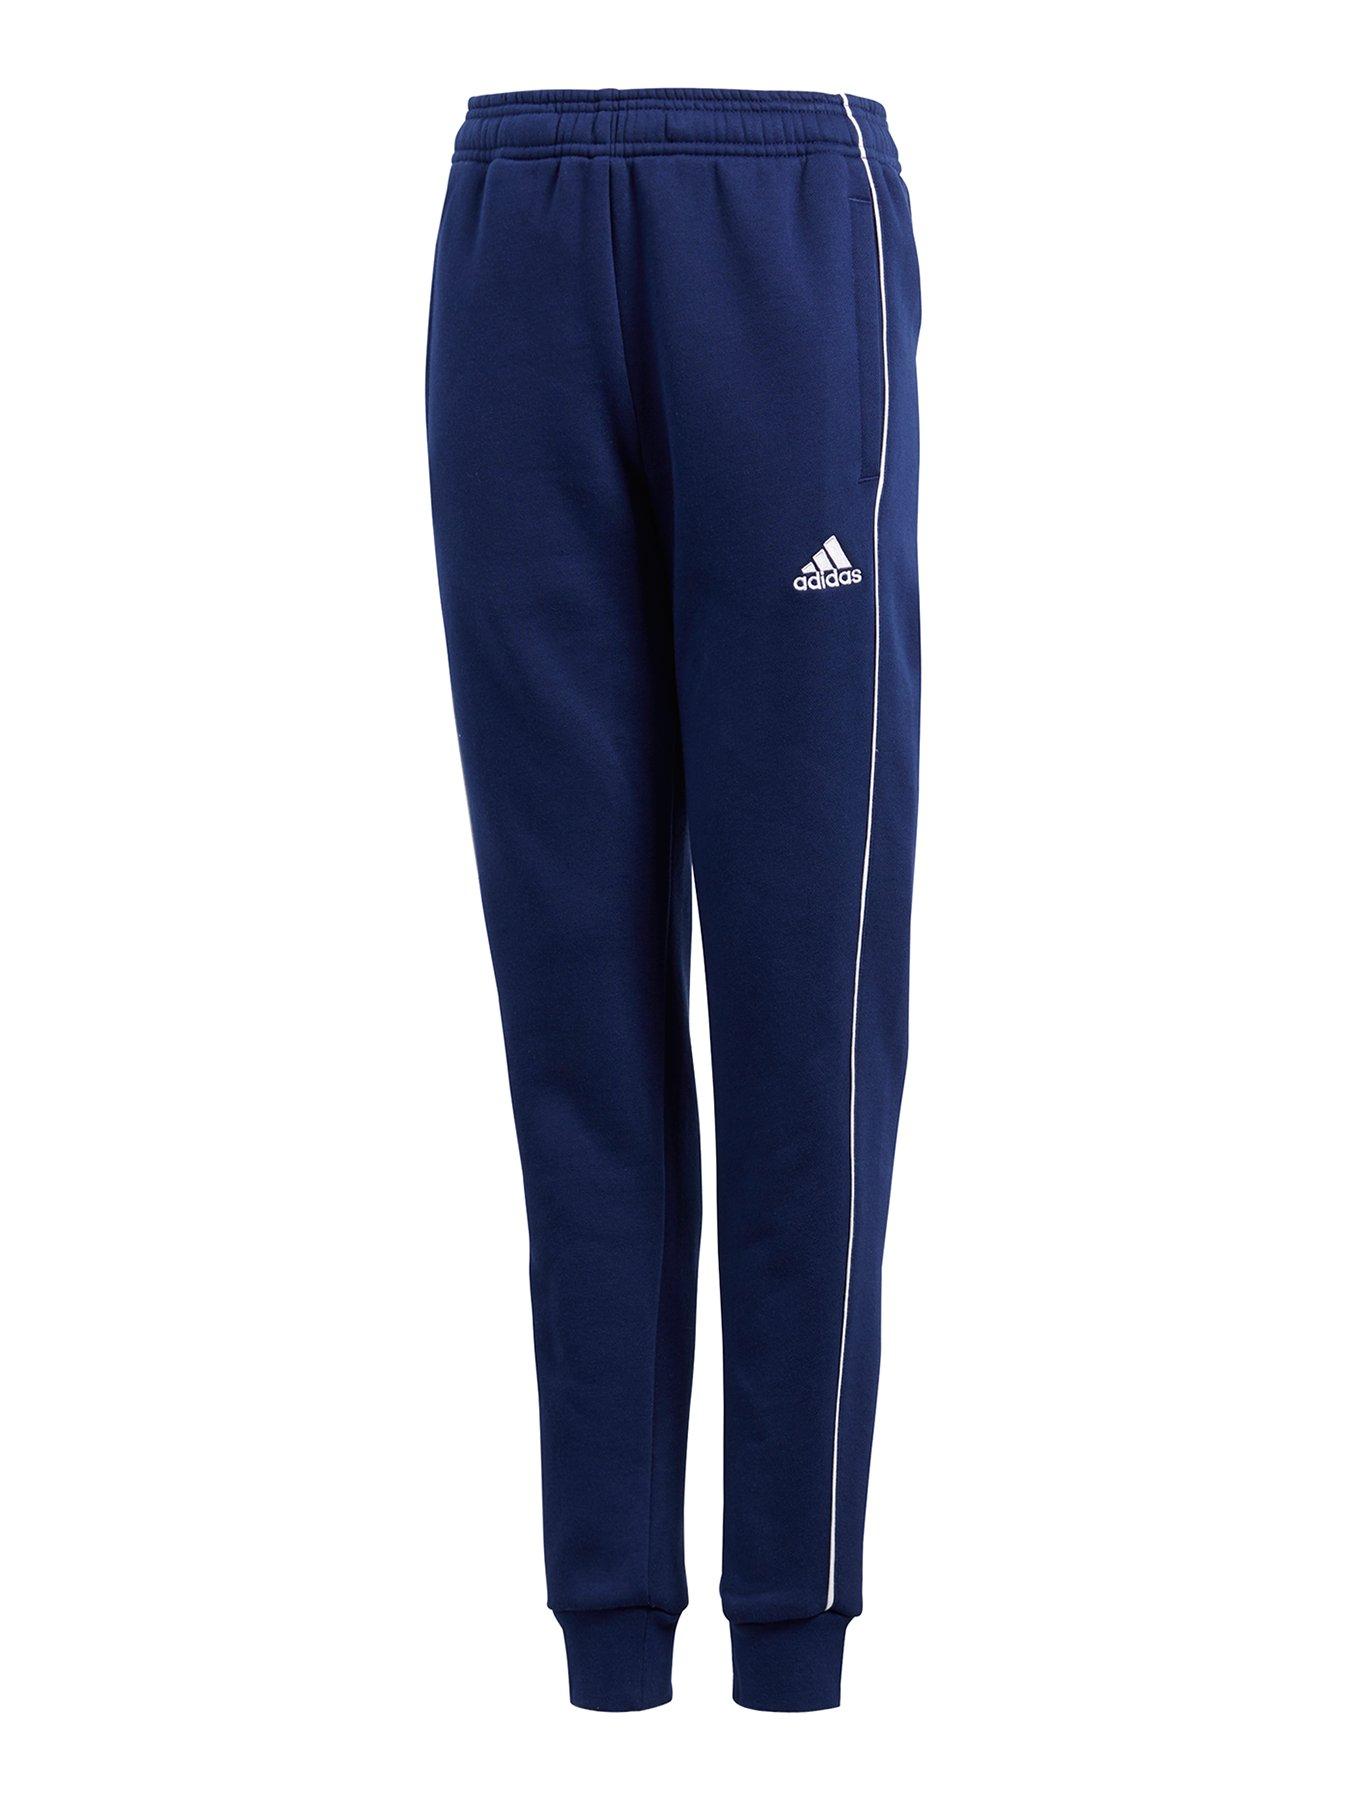 adidas tracksuit bottoms youth